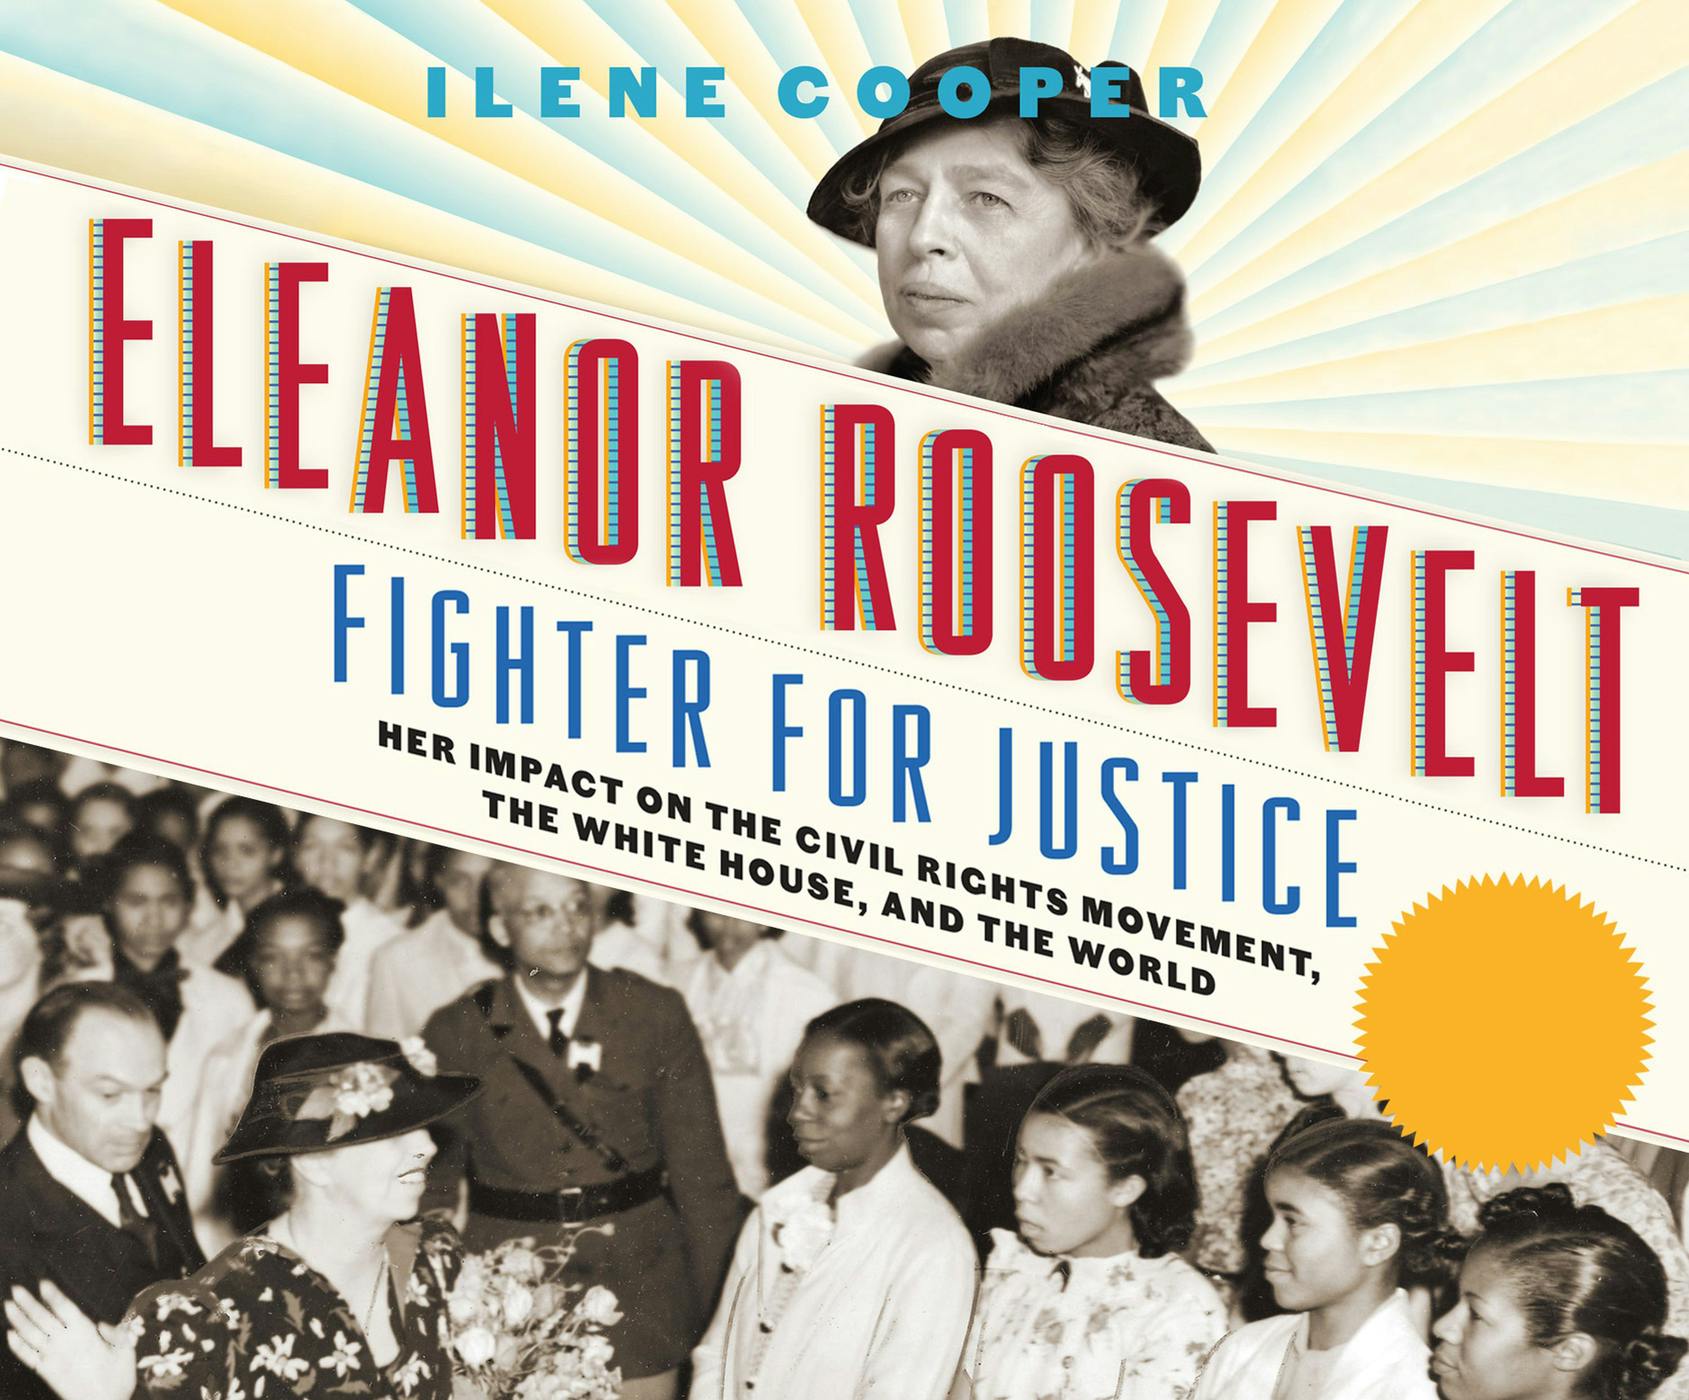 Eleanor Roosevelt, Fighter for Justice - Her Impact on the Civil Rights Movement, the White House, and the World (Unabridged) - Ilene Cooper